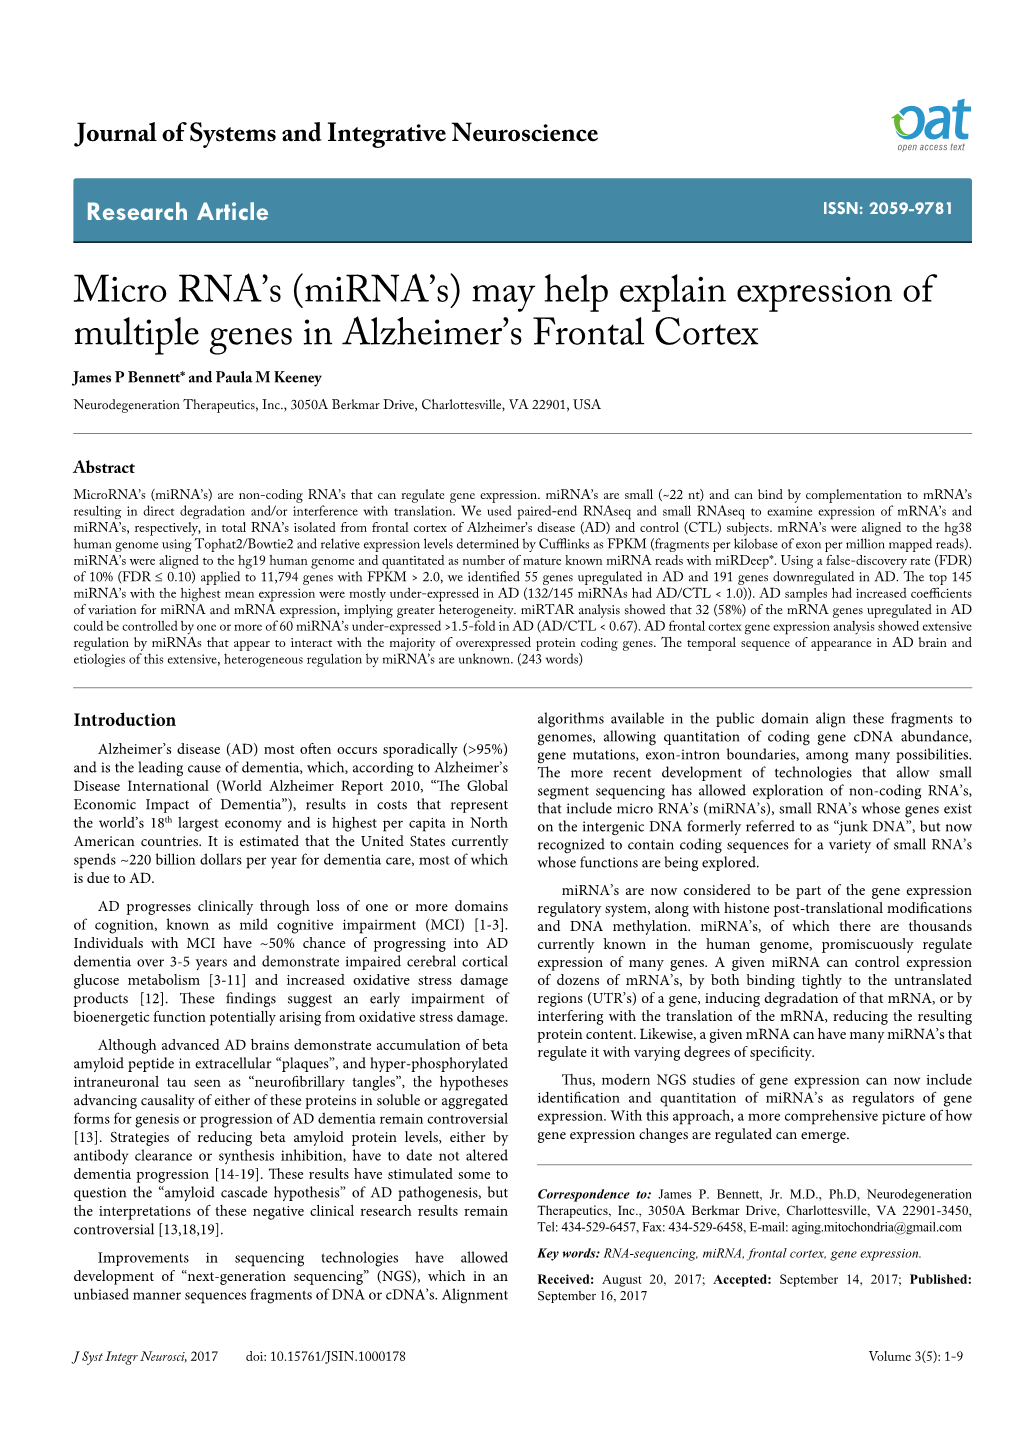 May Help Explain Expression of Multiple Genes in Alzheimer's